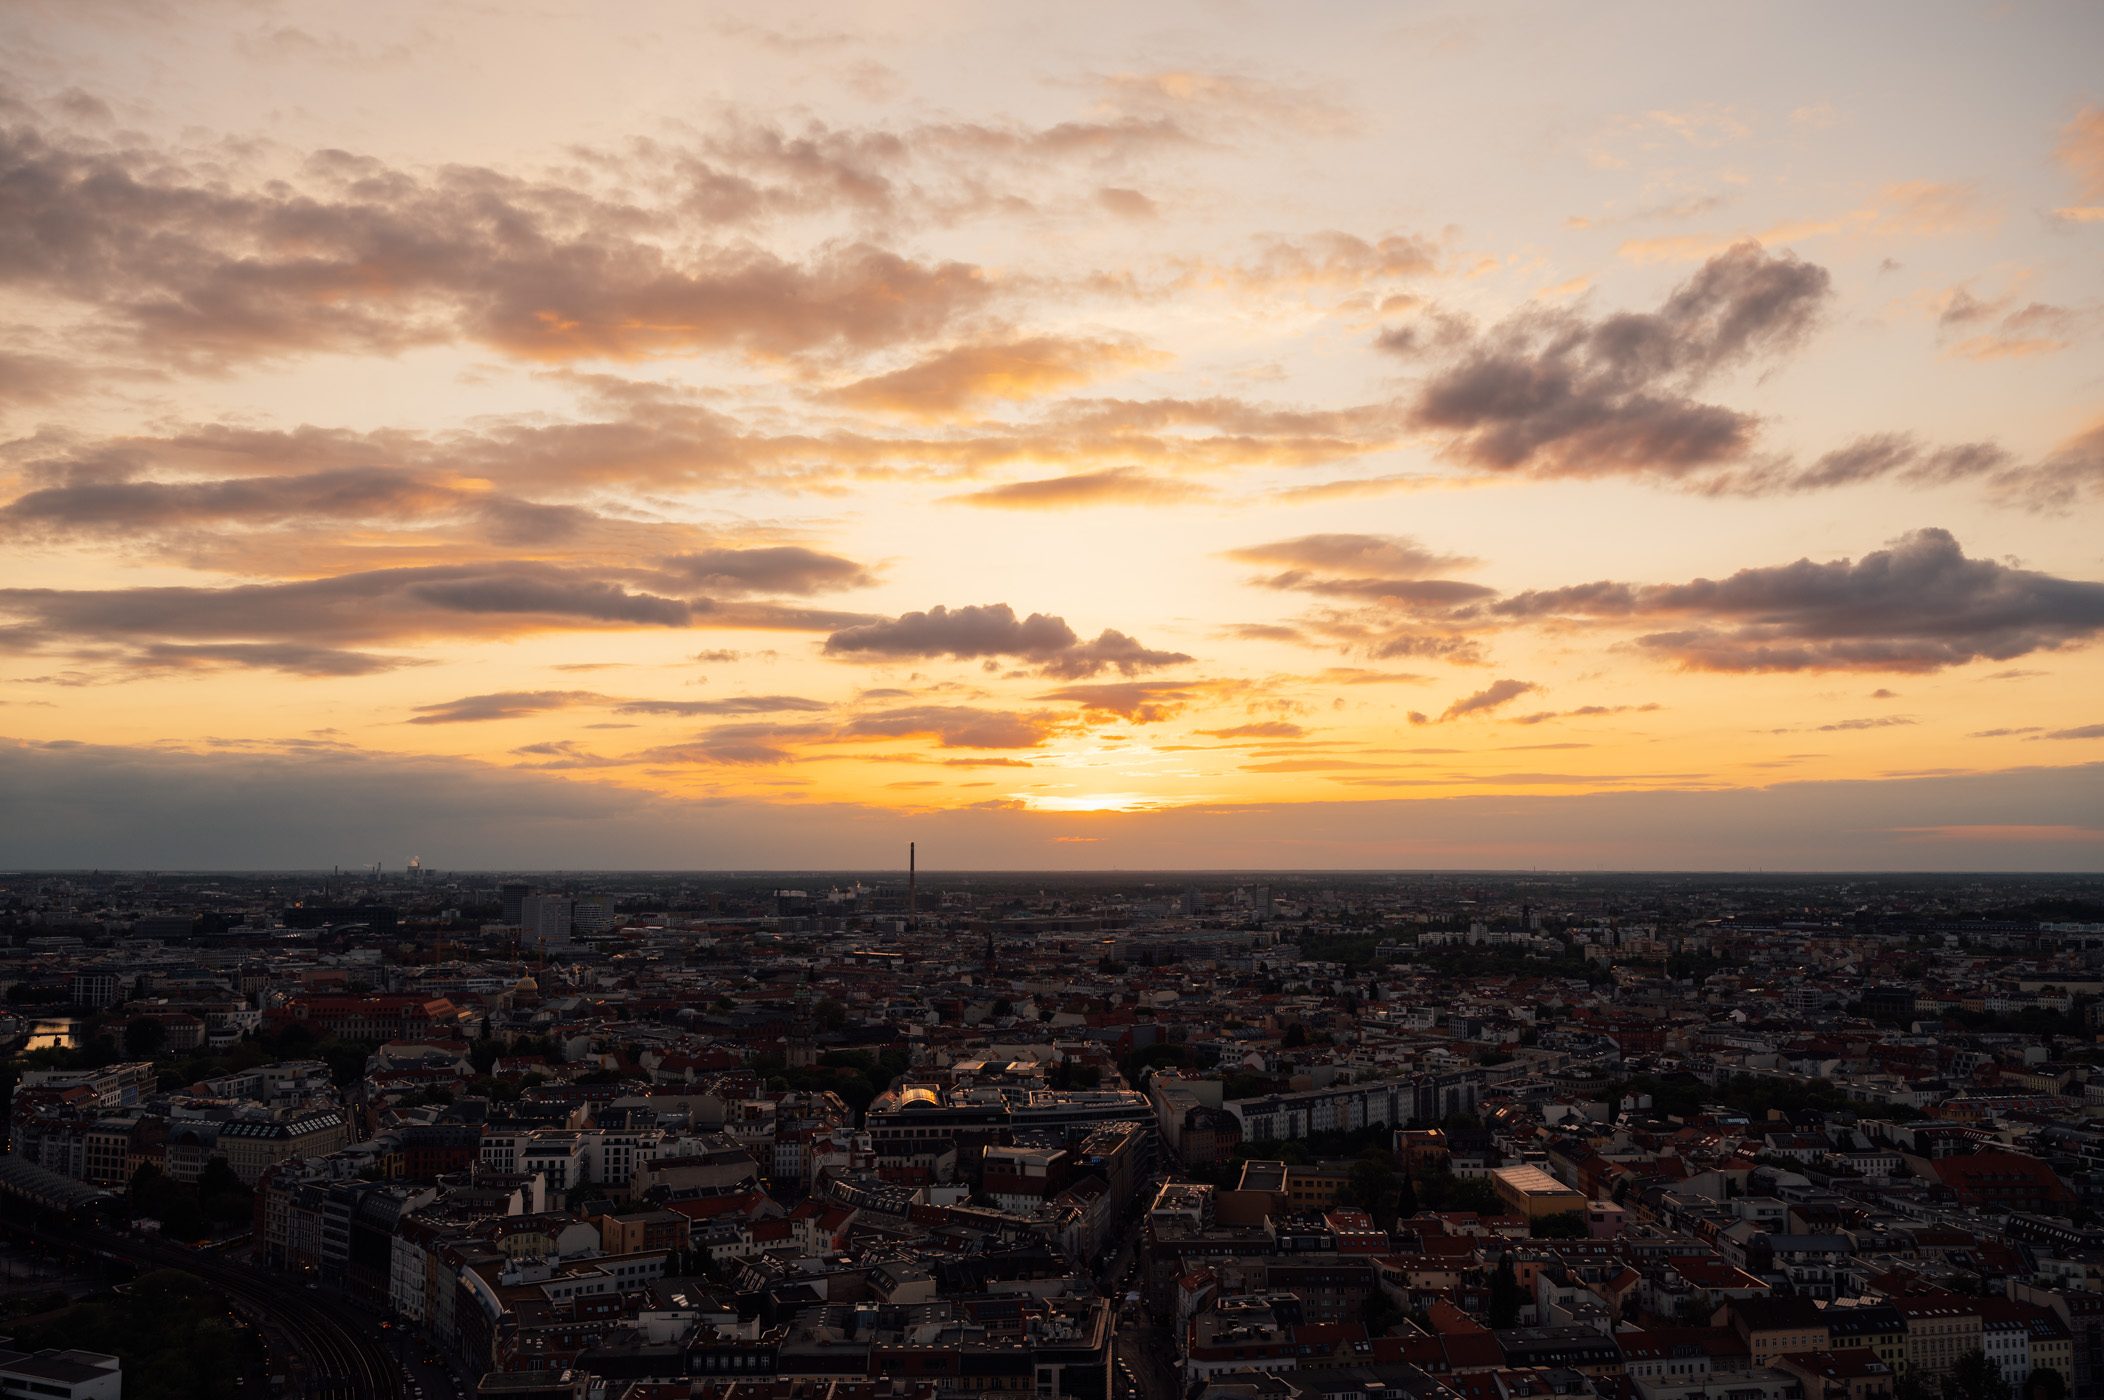 Sunset as seen from the rooftop terrace of Park Inn by Radisson Berlin